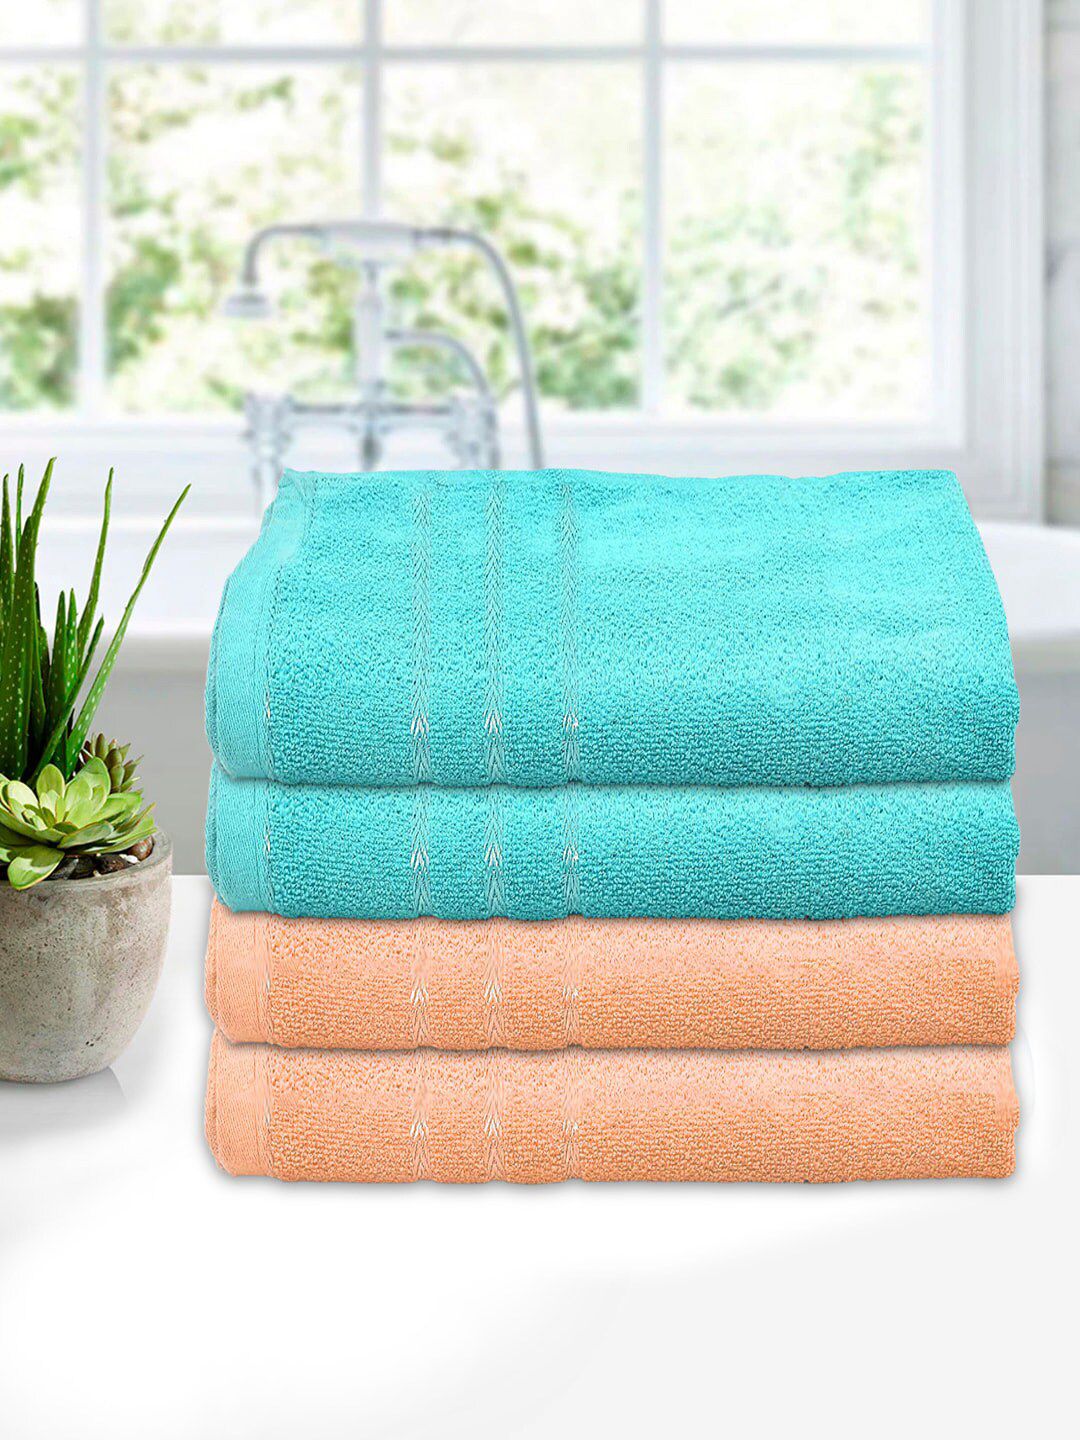 Kuber Industries Unisex Kids Set Of 4 Peach Colored & Blue Solid 210 GSM Soft Cotton Bath Towel Price in India